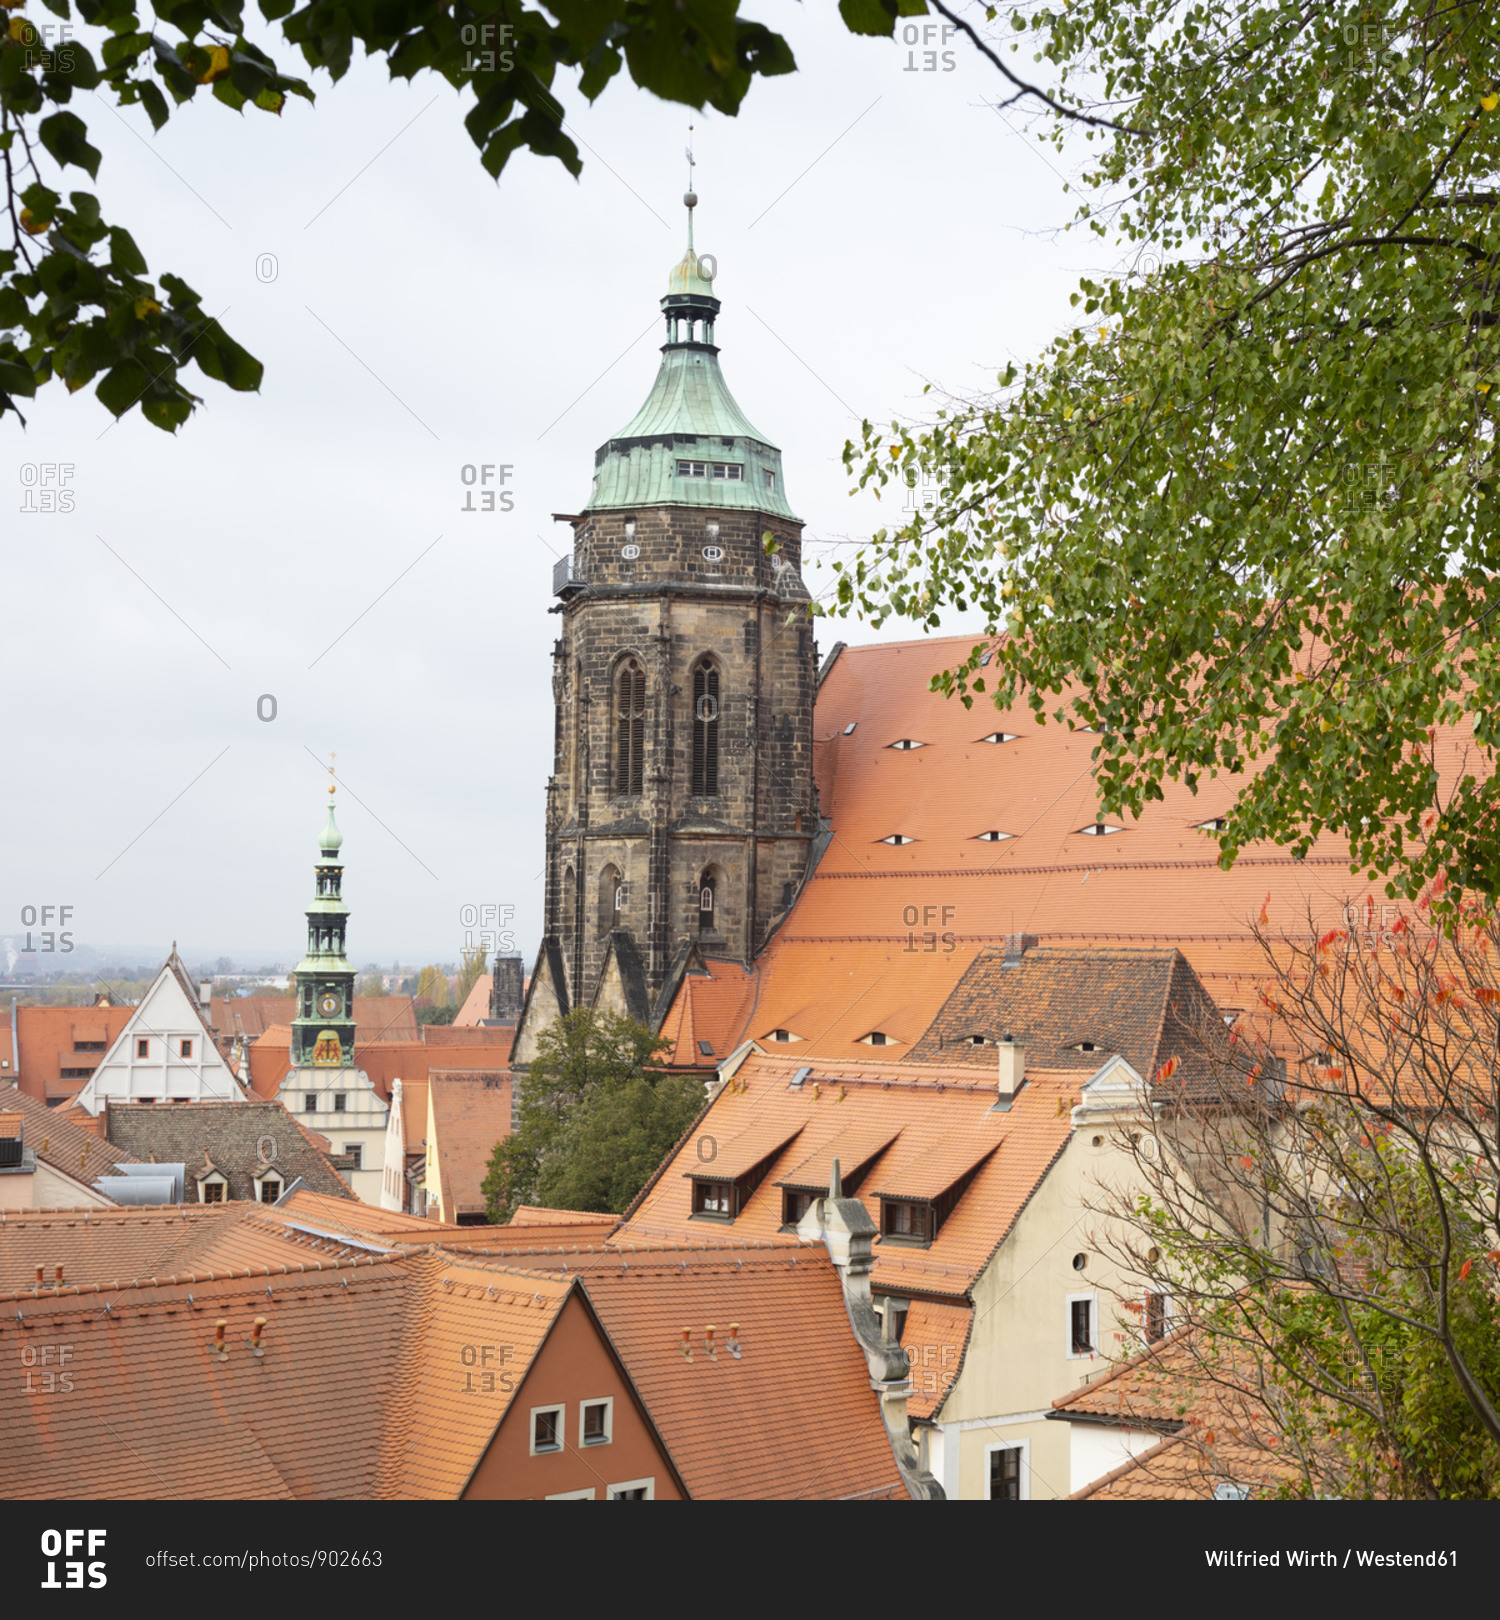 Germany- Saxony- Pirna- Marienkirche tower surrounded by tiled roofs